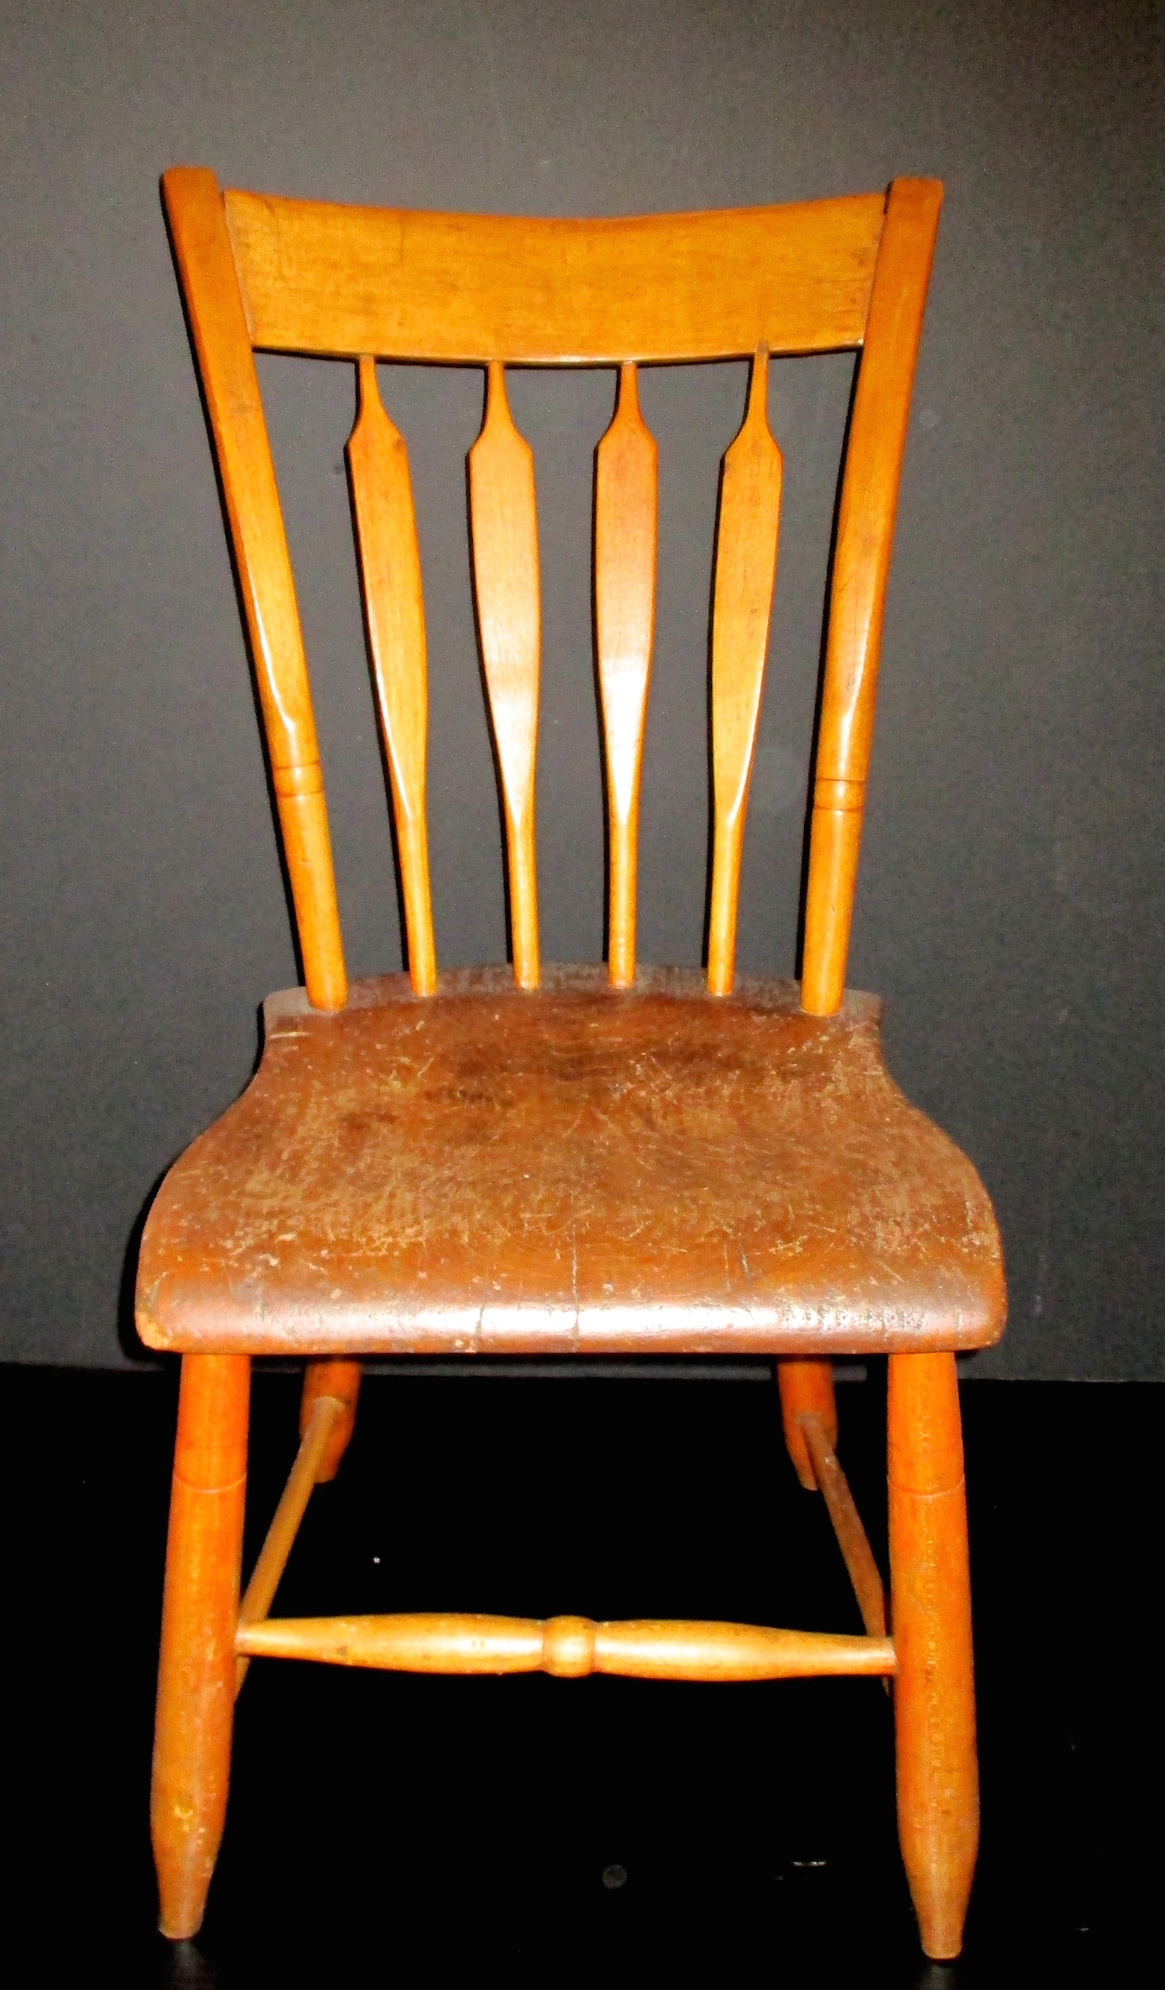 One of a Pair of 19th Century Arrow Back Chair)s